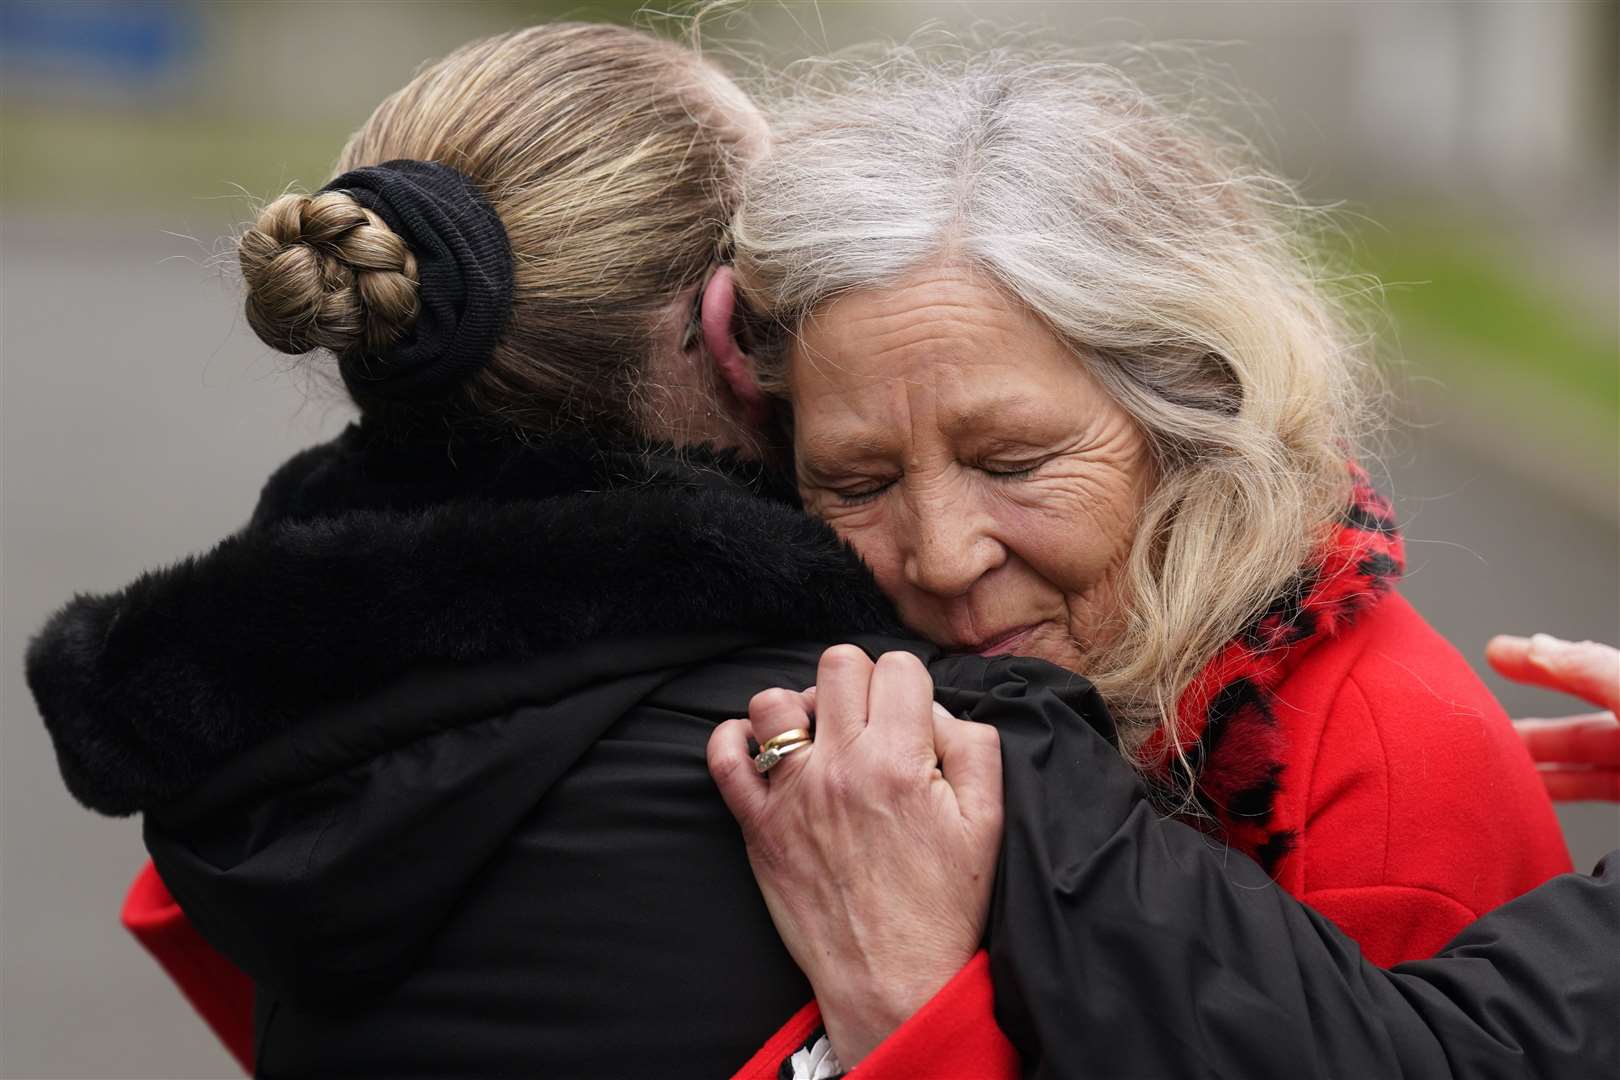 Stardust survivor Antoinette Keegan shares a hug after the verdicts were returned (Brian Lawless/PA)